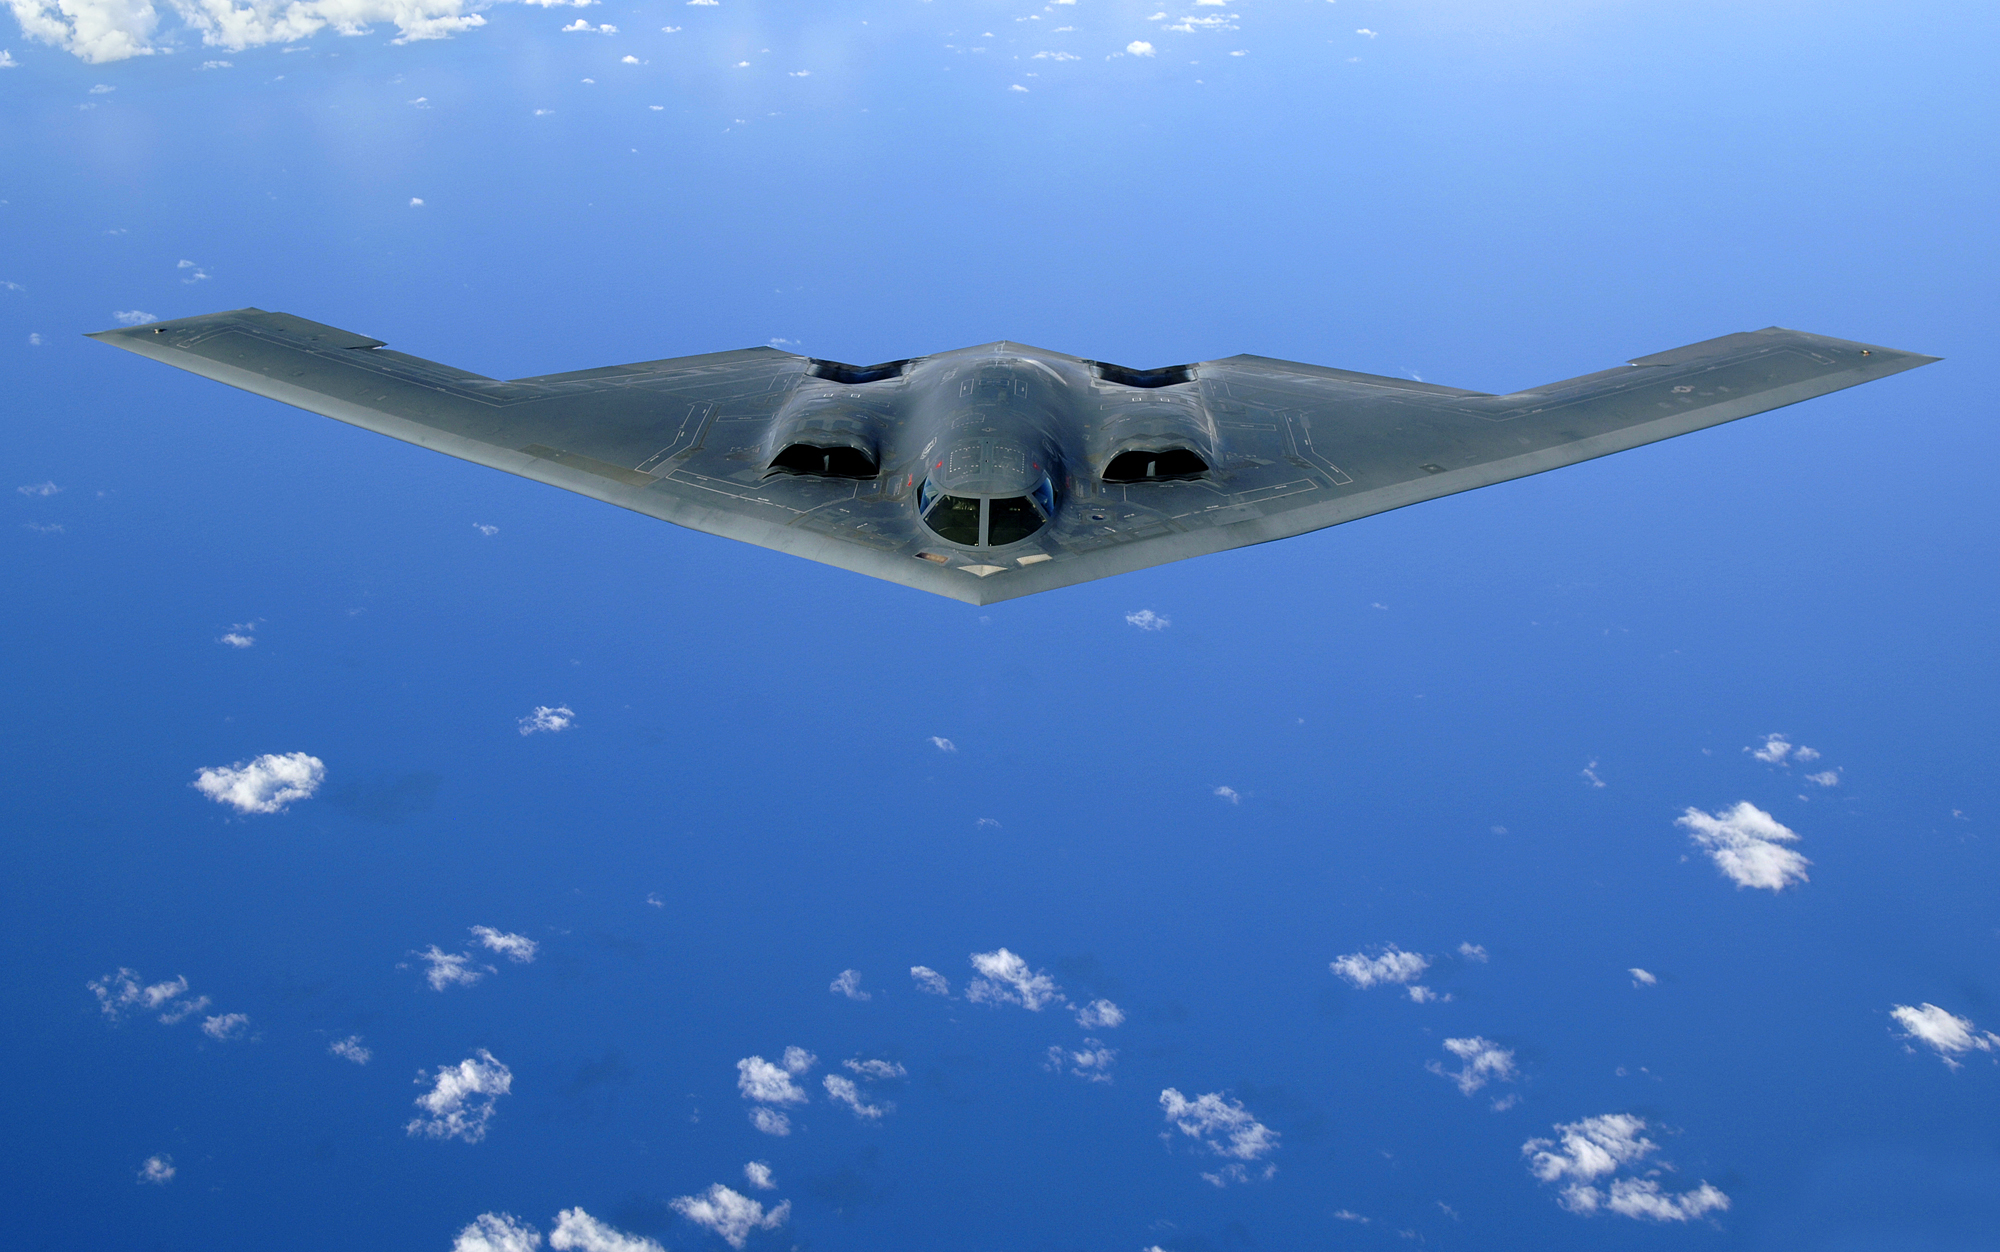 A new upgrade made the B-2 Spirit nuclear bomber, which cost $737 million, invulnerable to the Russian air defense system